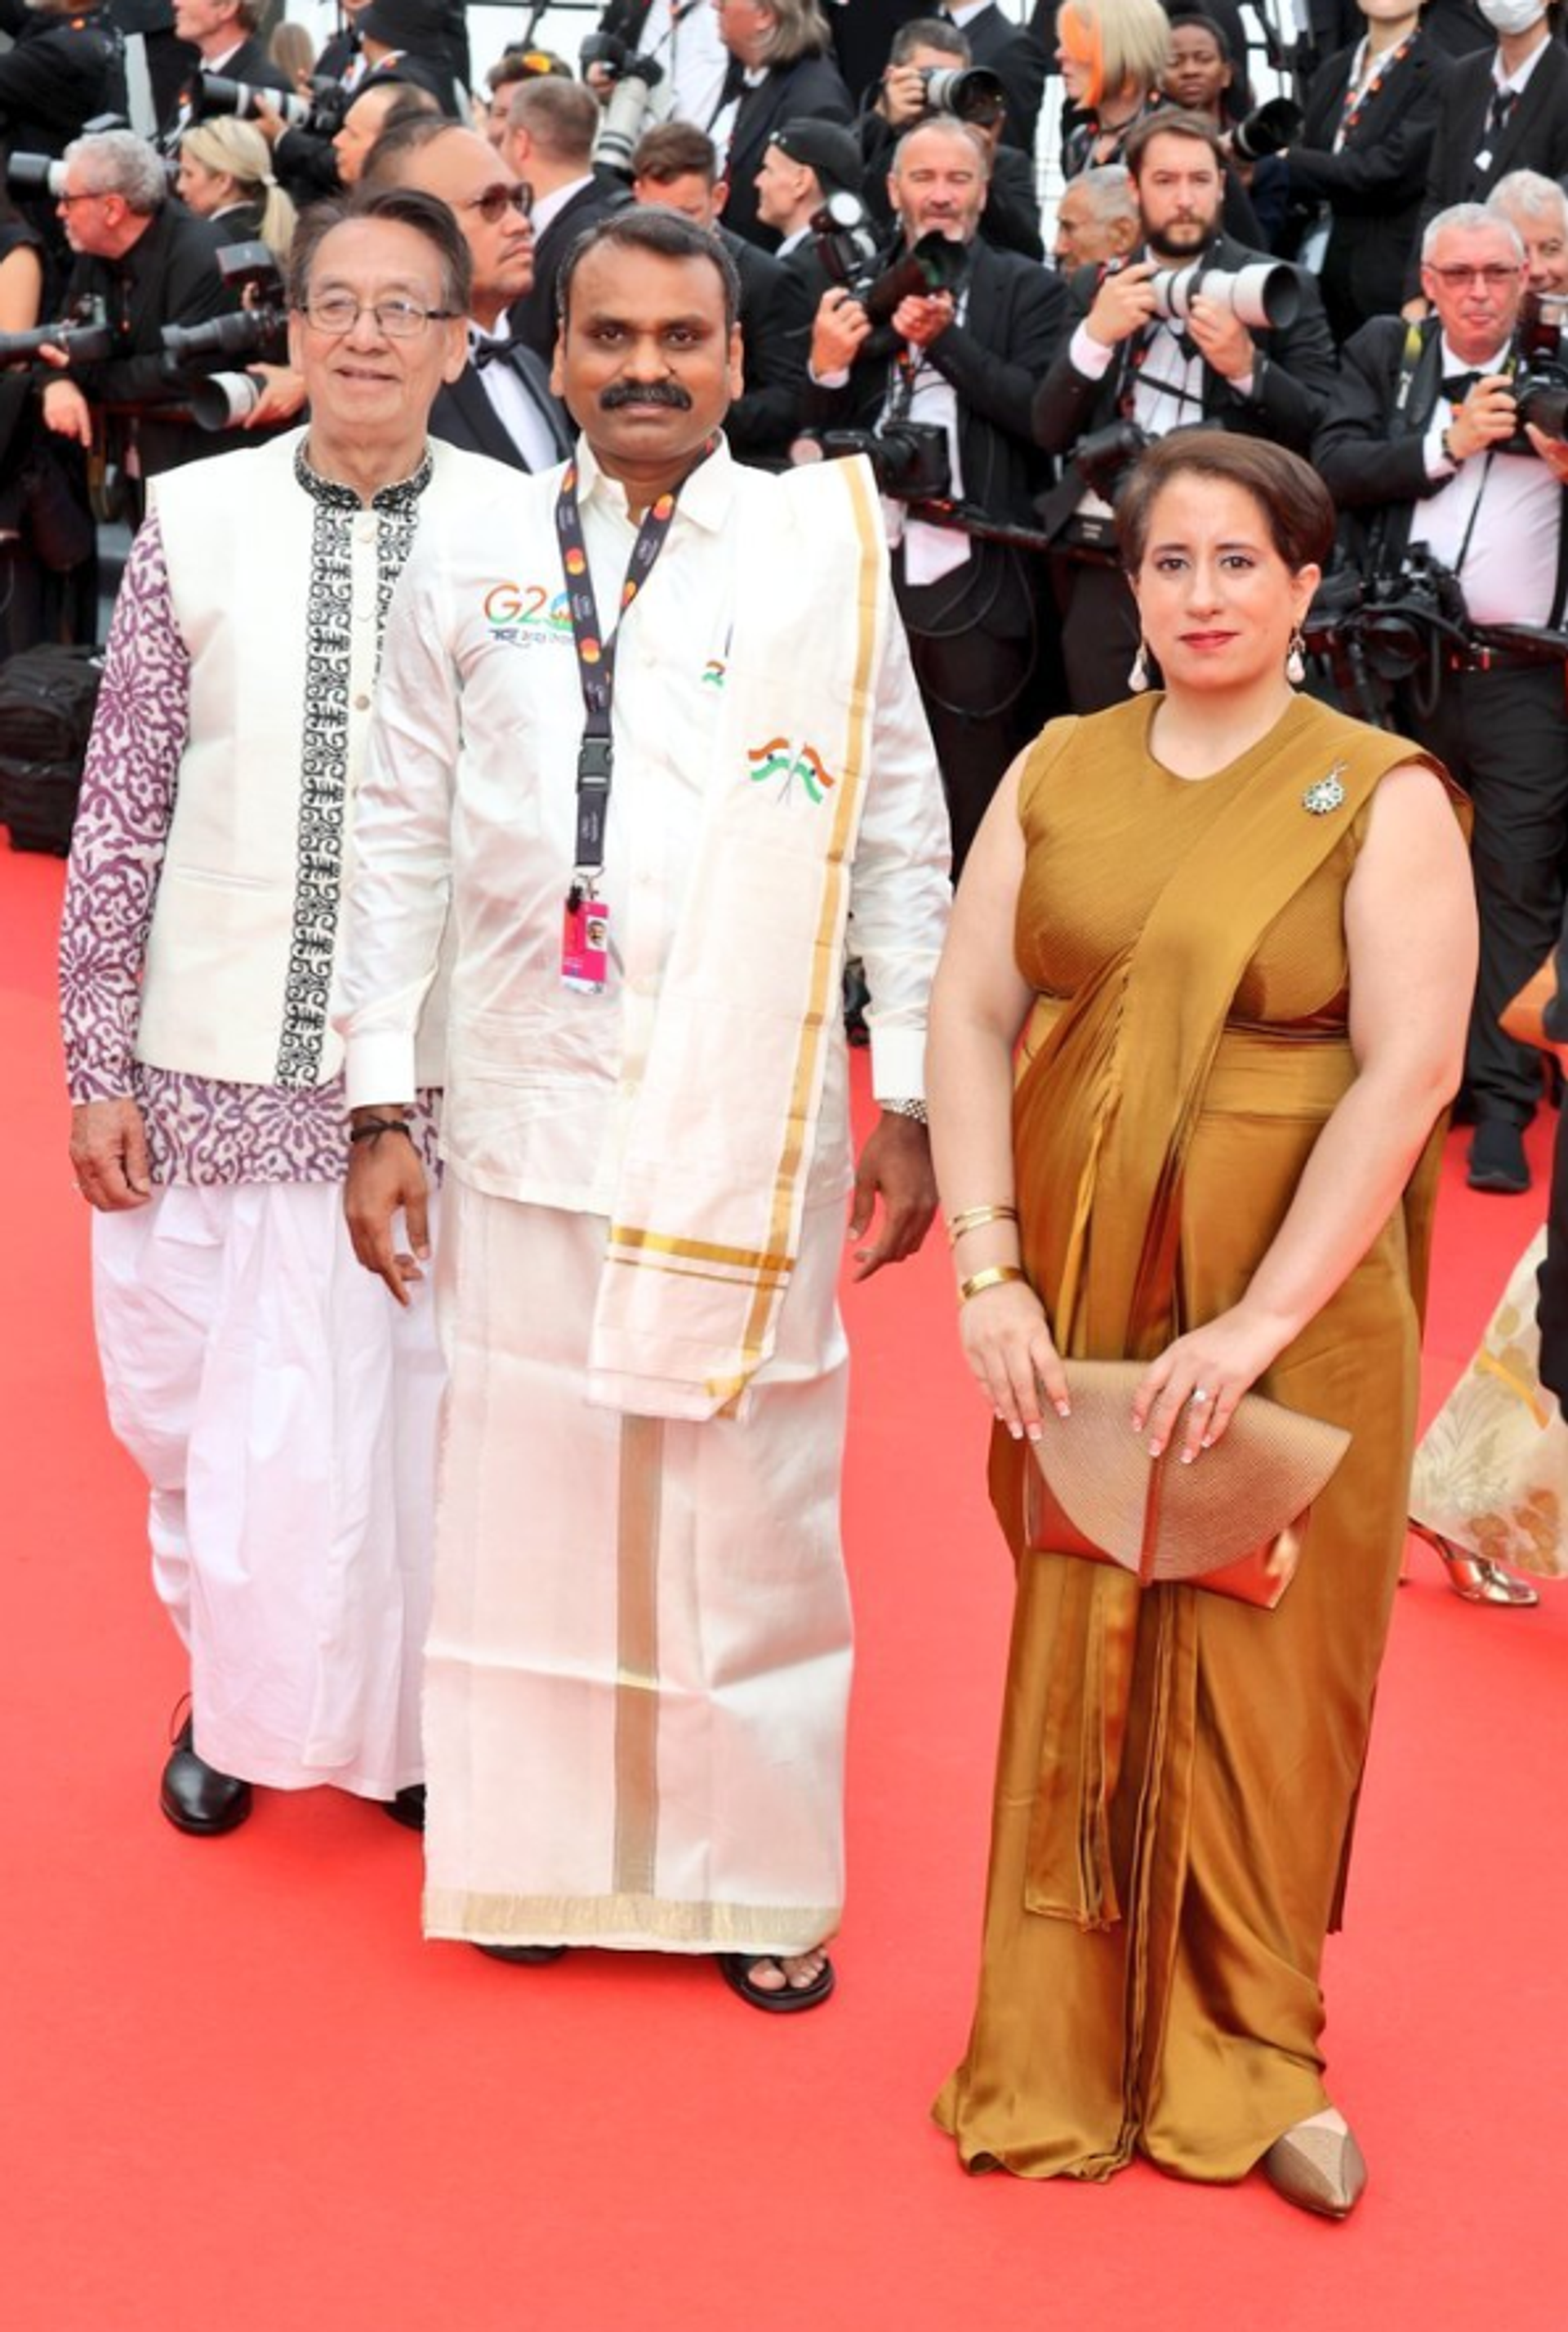 Indian politician and Minister of State for Information and Broadcasting, L. Murugan, shared the red carpet moment at Cannes with film producer Guneet Monga and veteran Manipuri actor Kangabam Tomba. - Sputnik India, 1920, 17.05.2023